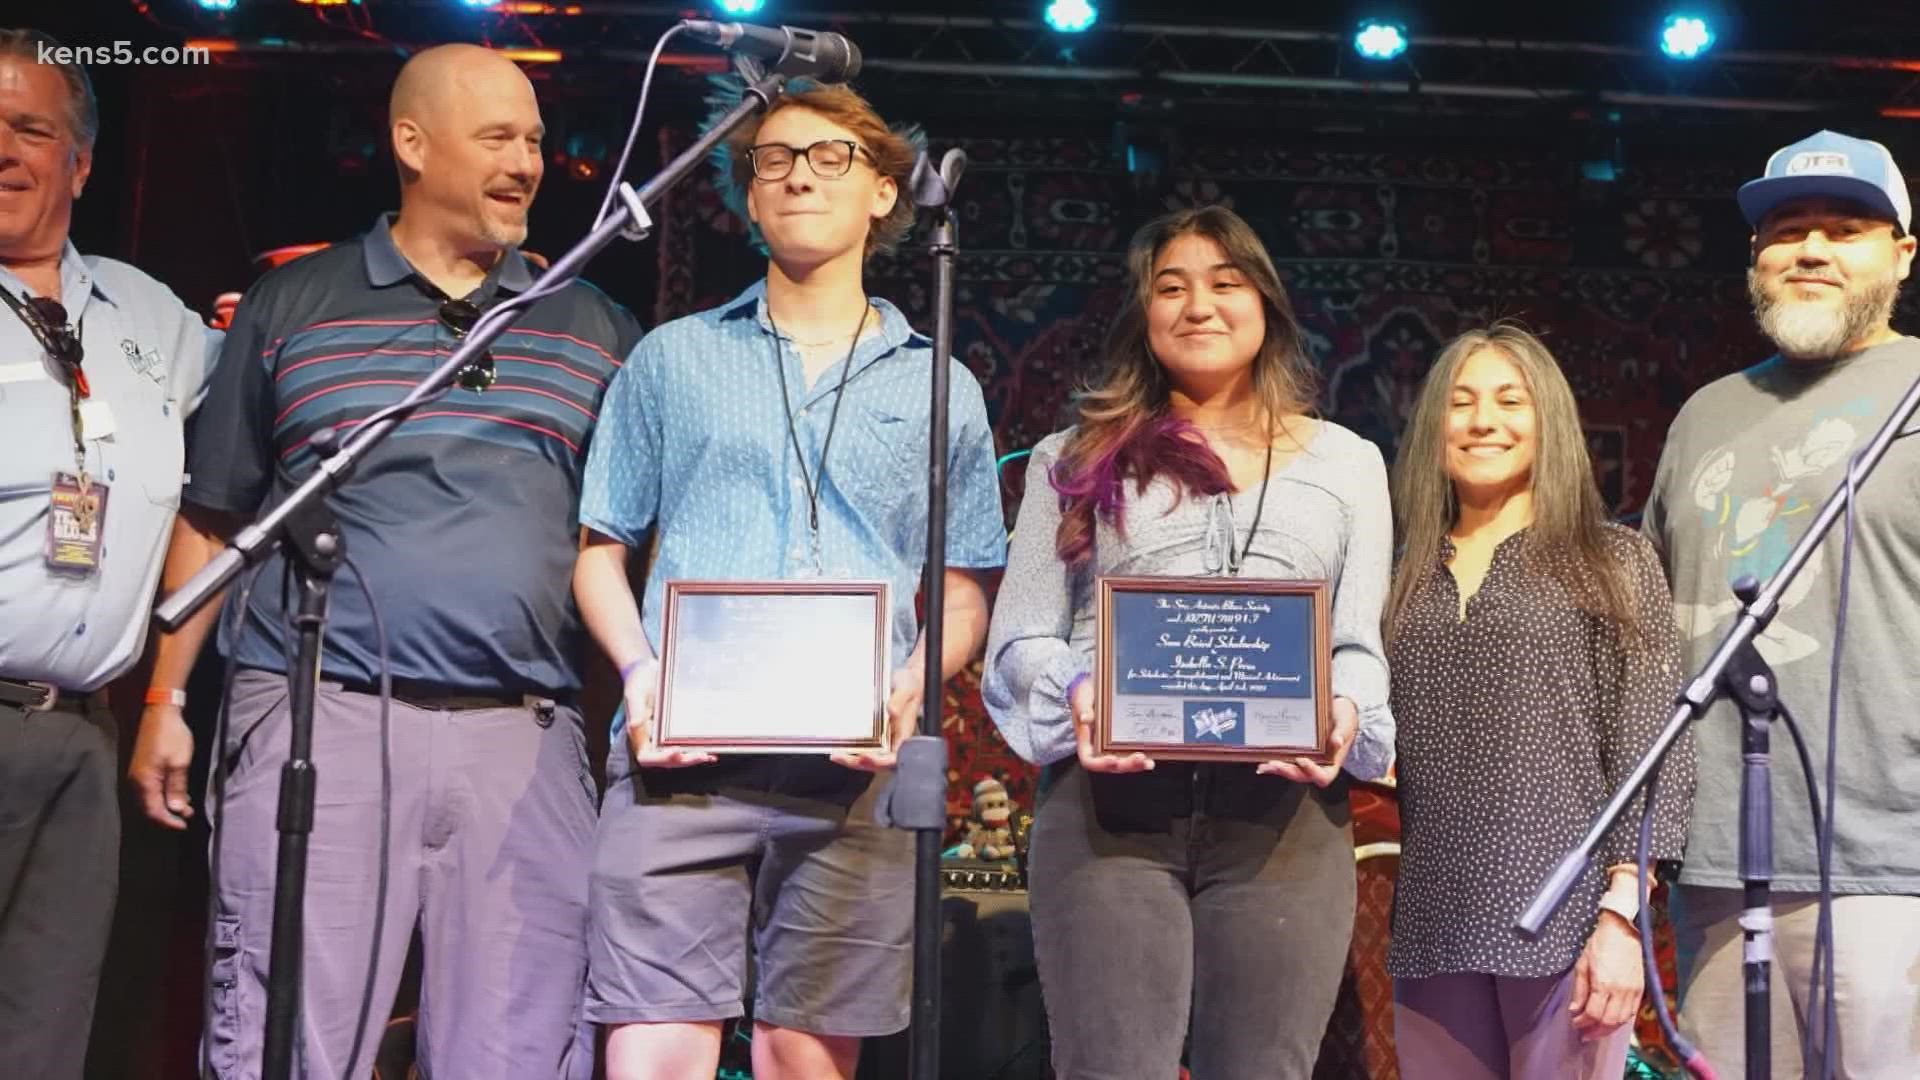 Isabella Perez and Jake Troop Valdivia are bandmates who play different instruments, and they decided to take the same musical risk to win a scholarship.